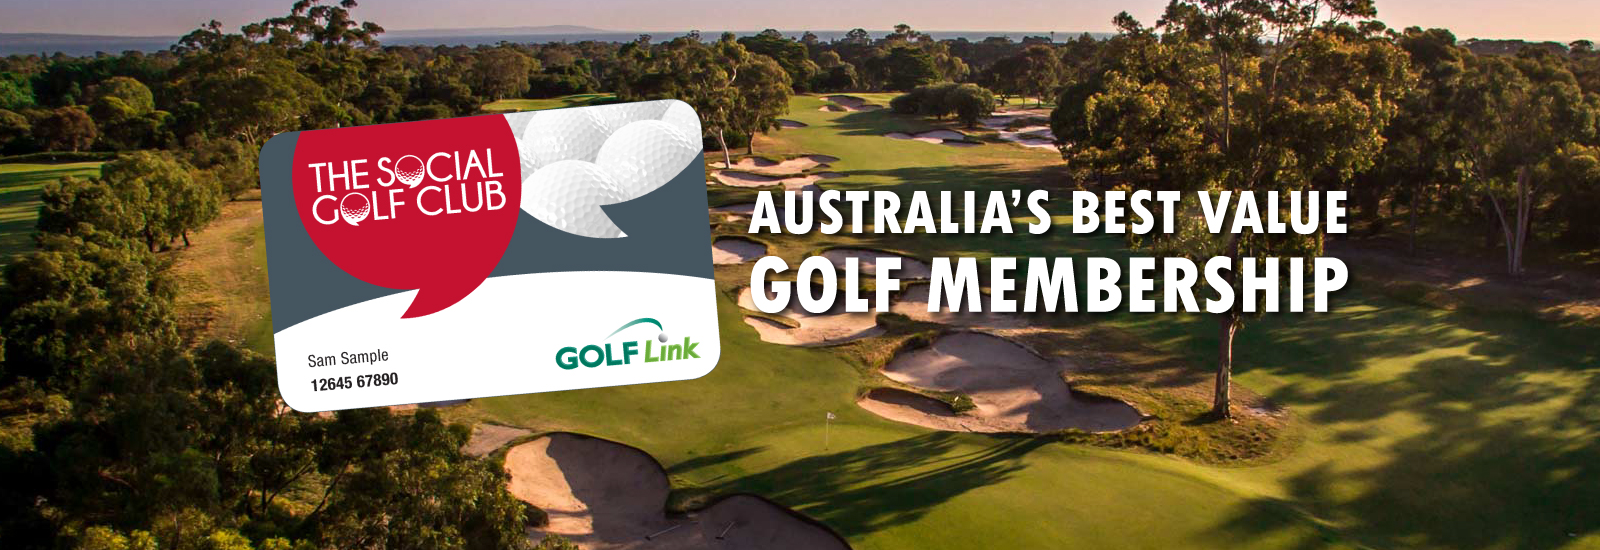 The Social Golf Club - A One-Stop Shop For Group Bookings